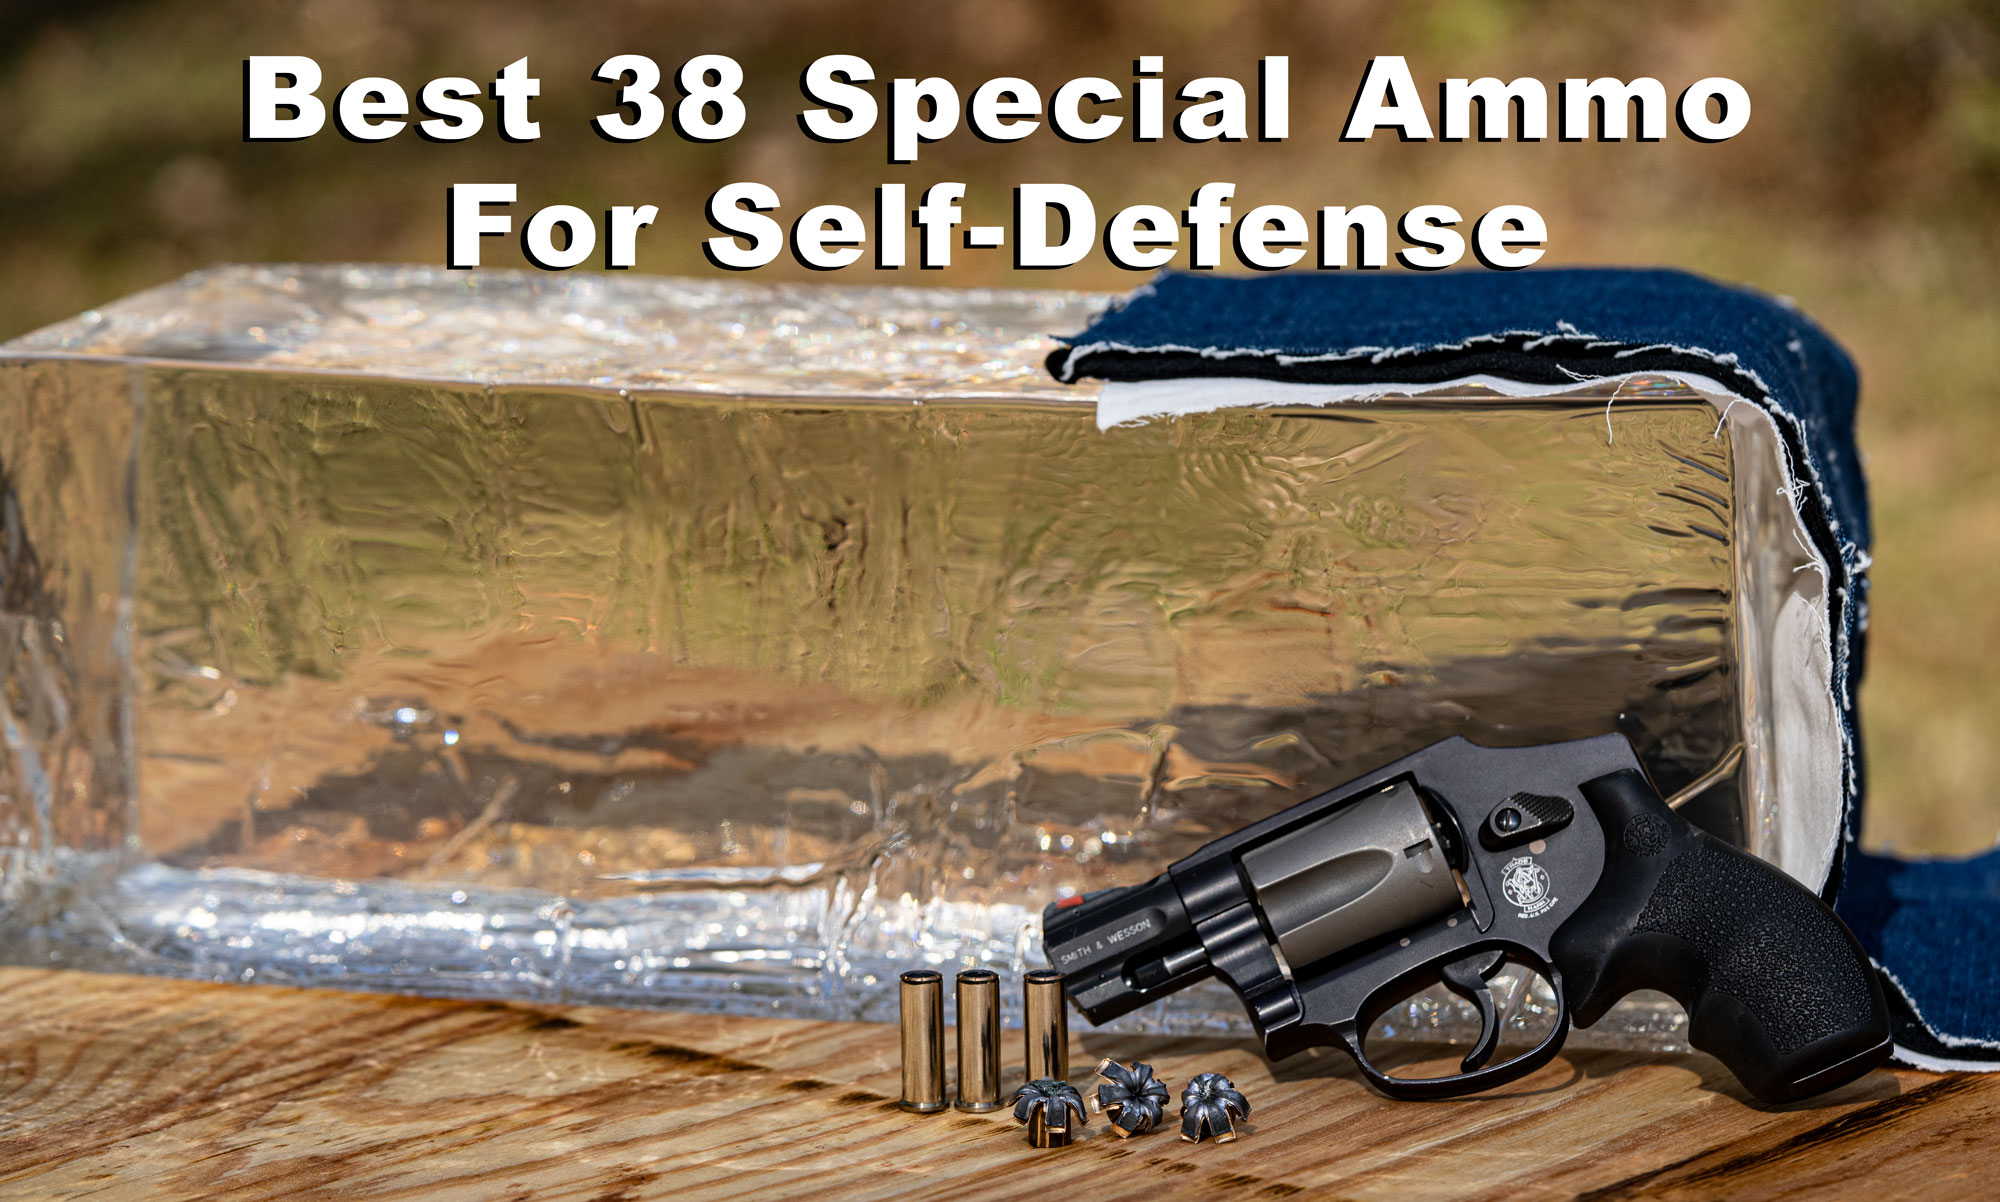 Testing for the best 38 special ammo for self defense